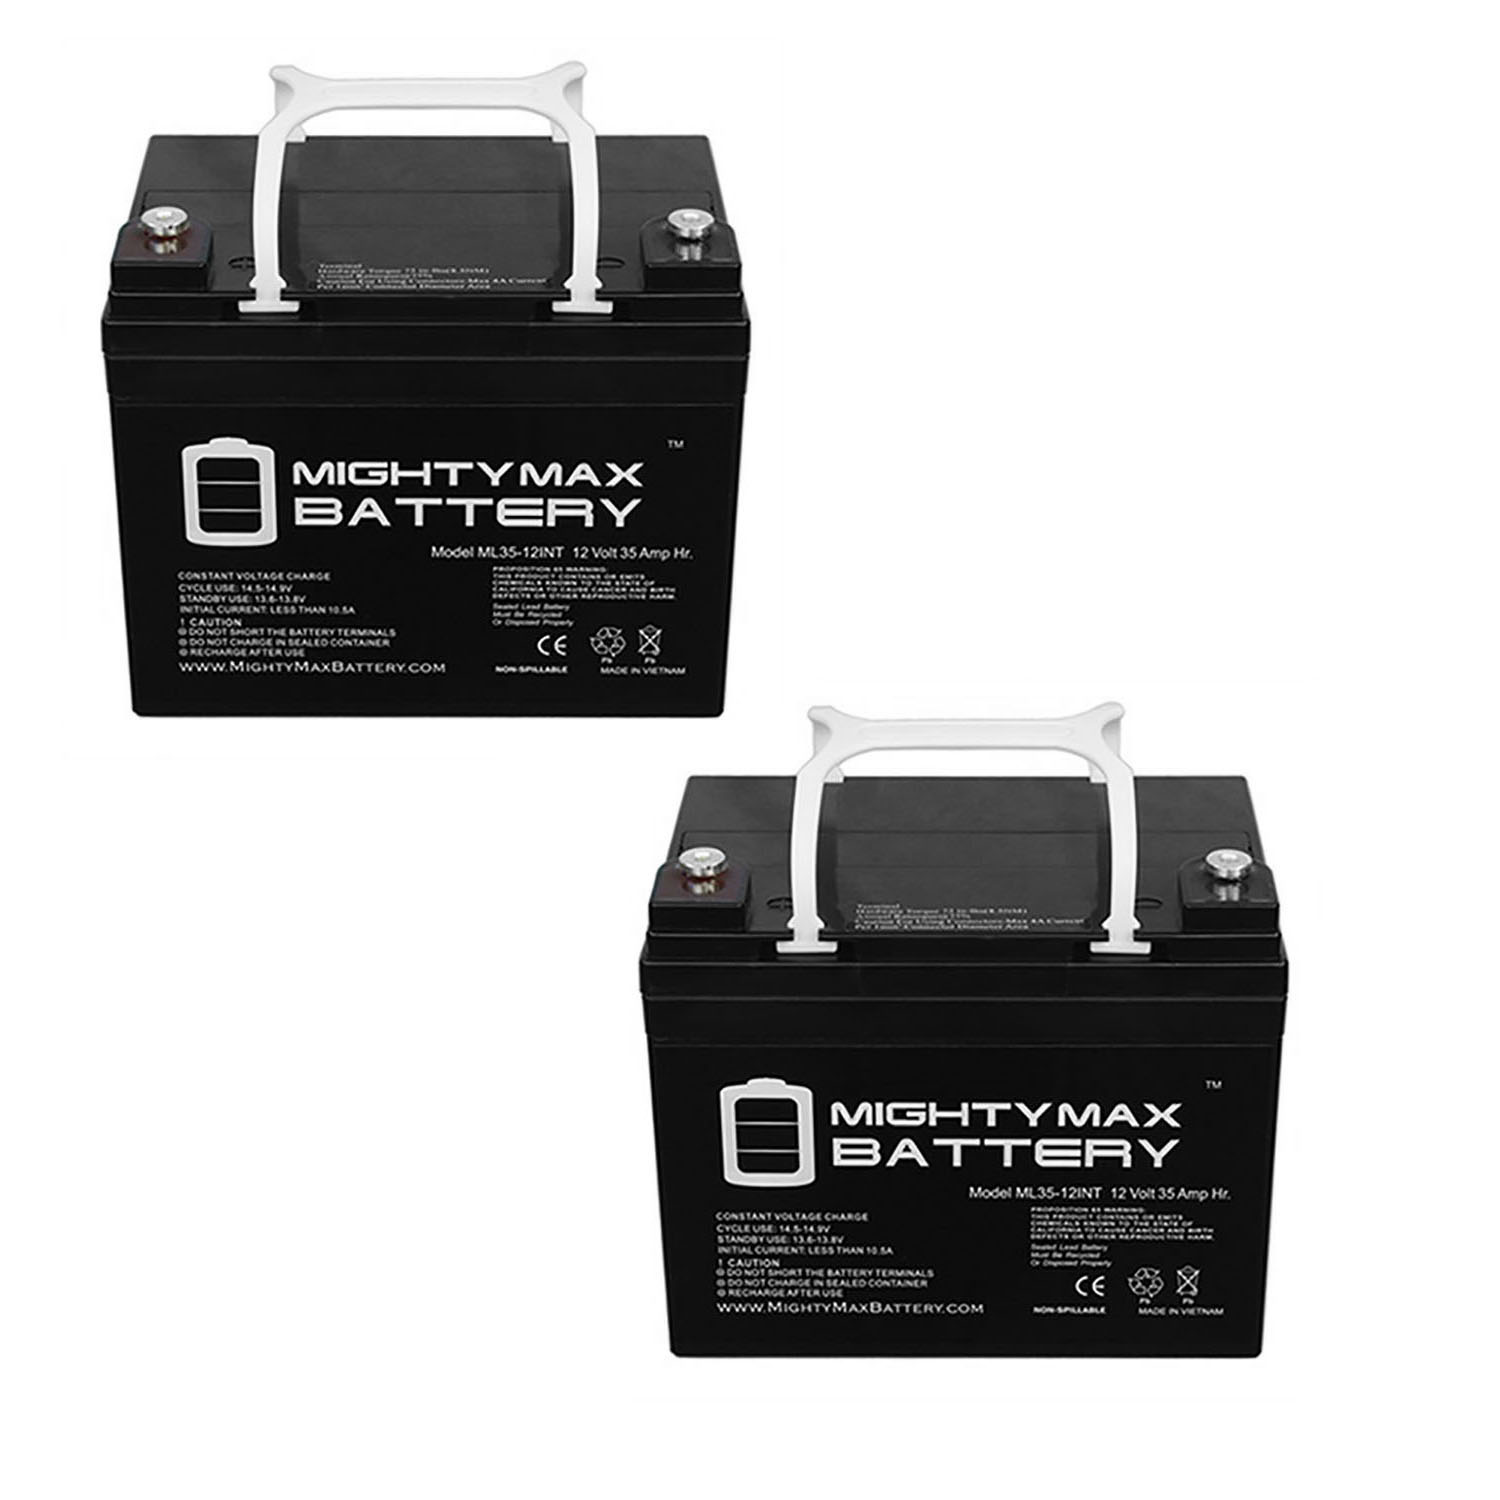 12V 35AH INT Replacement Battery for Rascal 300 - 2 Pack